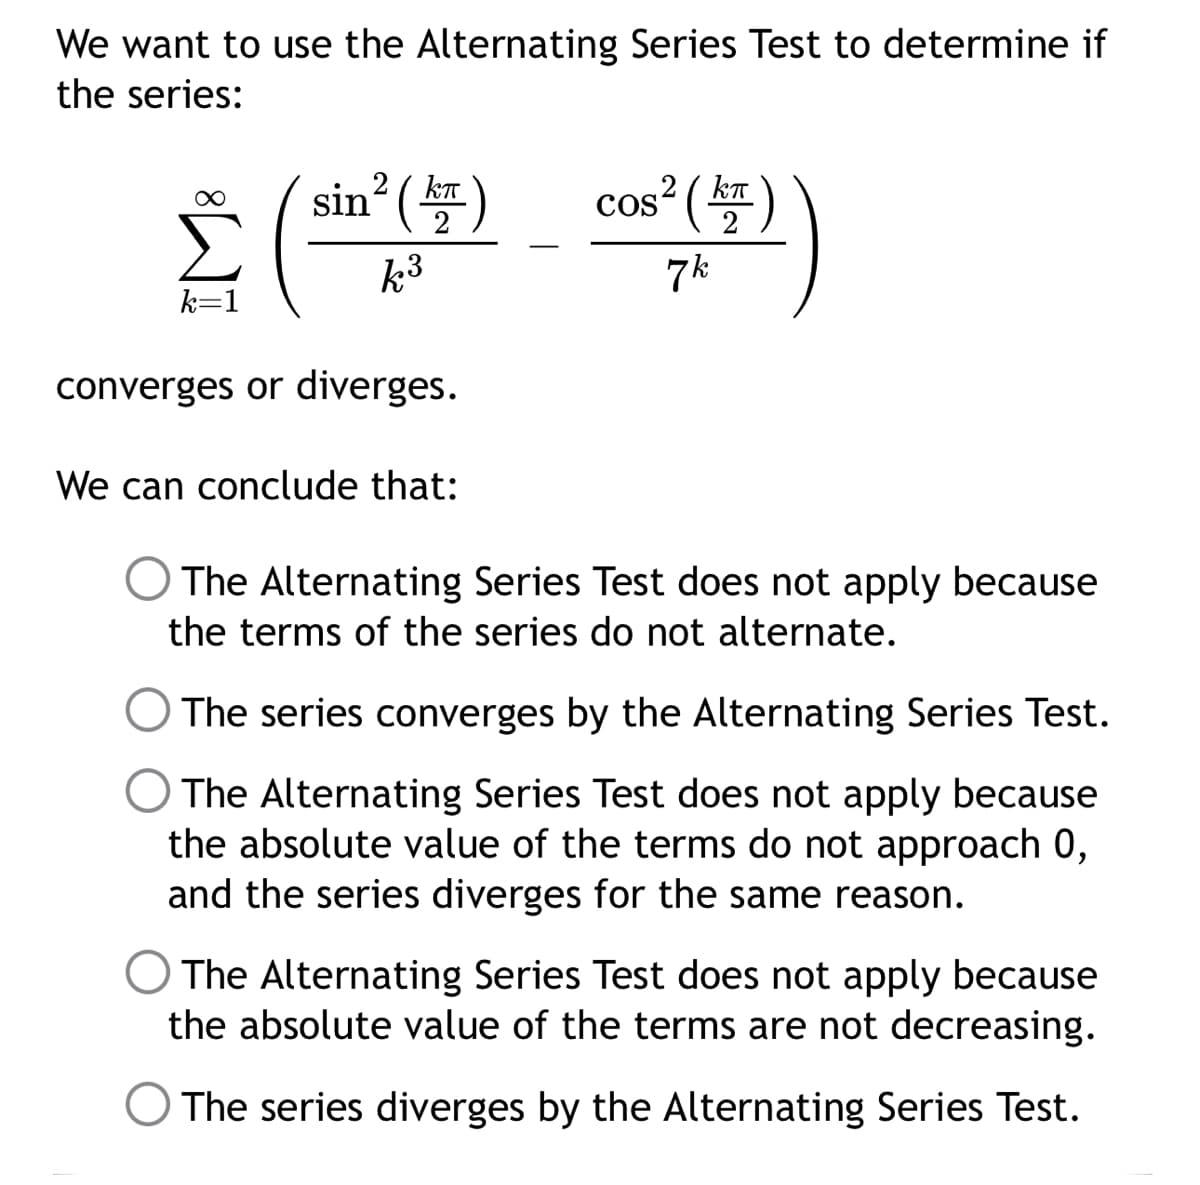 We want to use the Alternating Series Test to determine if
the series:
sin² (kT
2
COS² (KT)
k³
k=1
7k
converges or diverges.
We can conclude that:
The Alternating Series Test does not apply because
the terms of the series do not alternate.
The series converges by the Alternating Series Test.
The Alternating Series Test does not apply because
the absolute value of the terms do not approach 0,
and the series diverges for the same reason.
The Alternating Series Test does not apply because
the absolute value of the terms are not decreasing.
The series diverges by the Alternating Series Test.